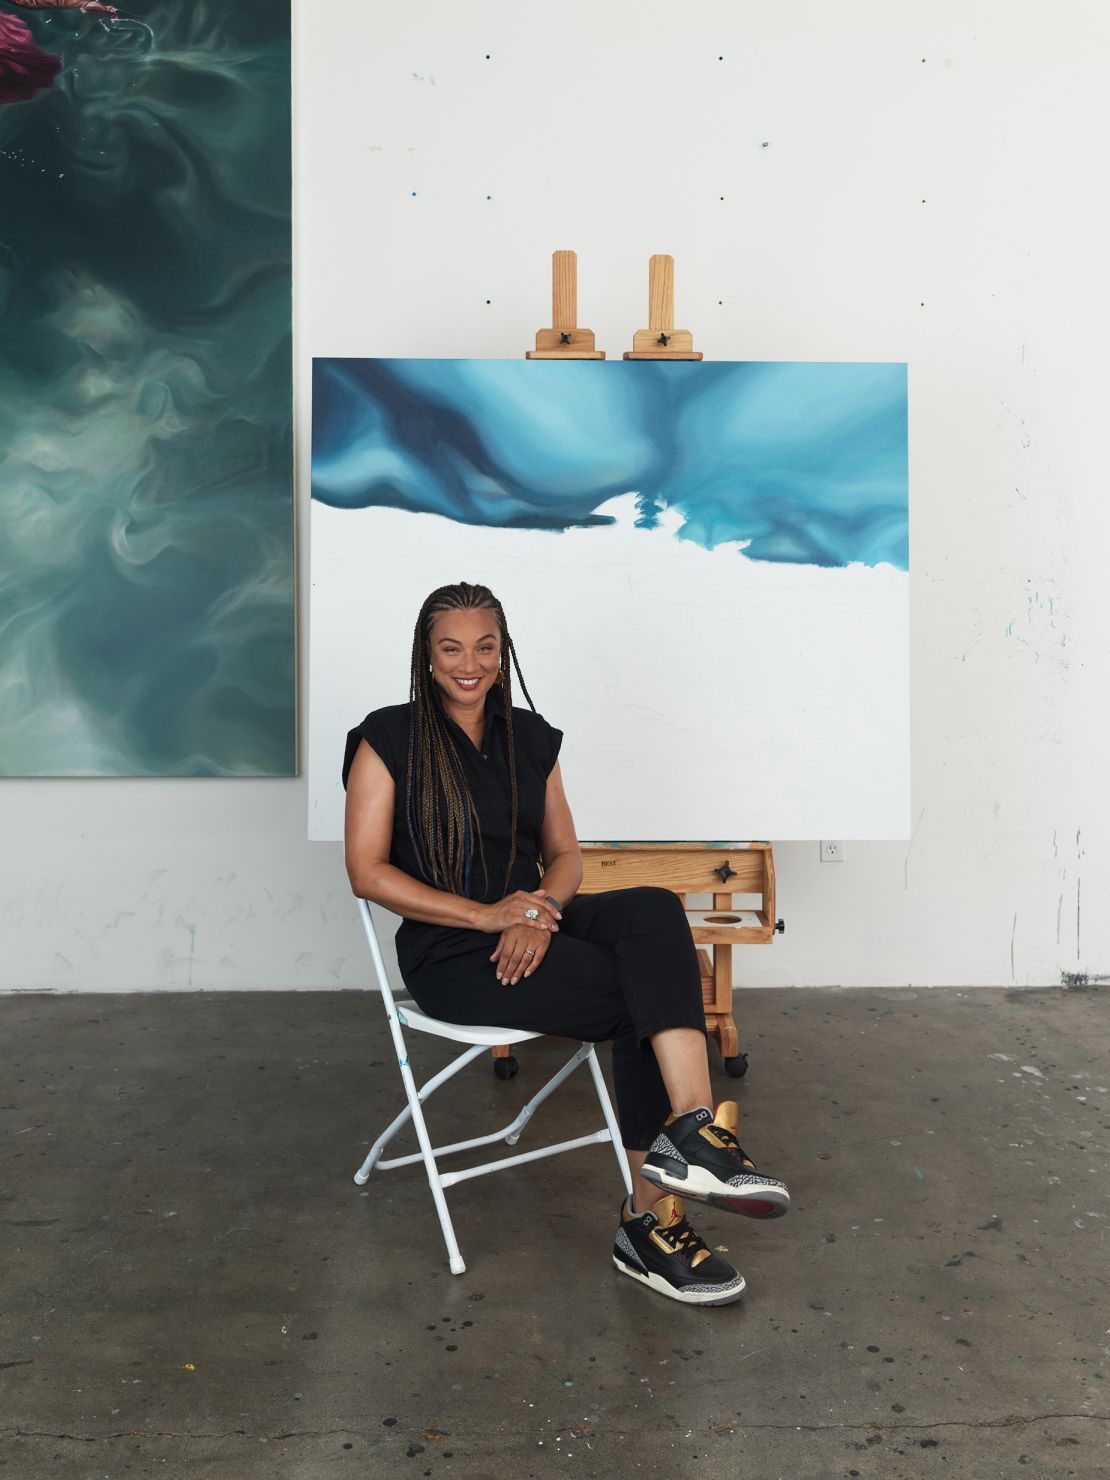 “If I’m upset and I get to go to the ocean, I do sit back and feel more connected to something larger when I’m there," the artist Calida Rawles told CNN. "I feel like part of something more than me."